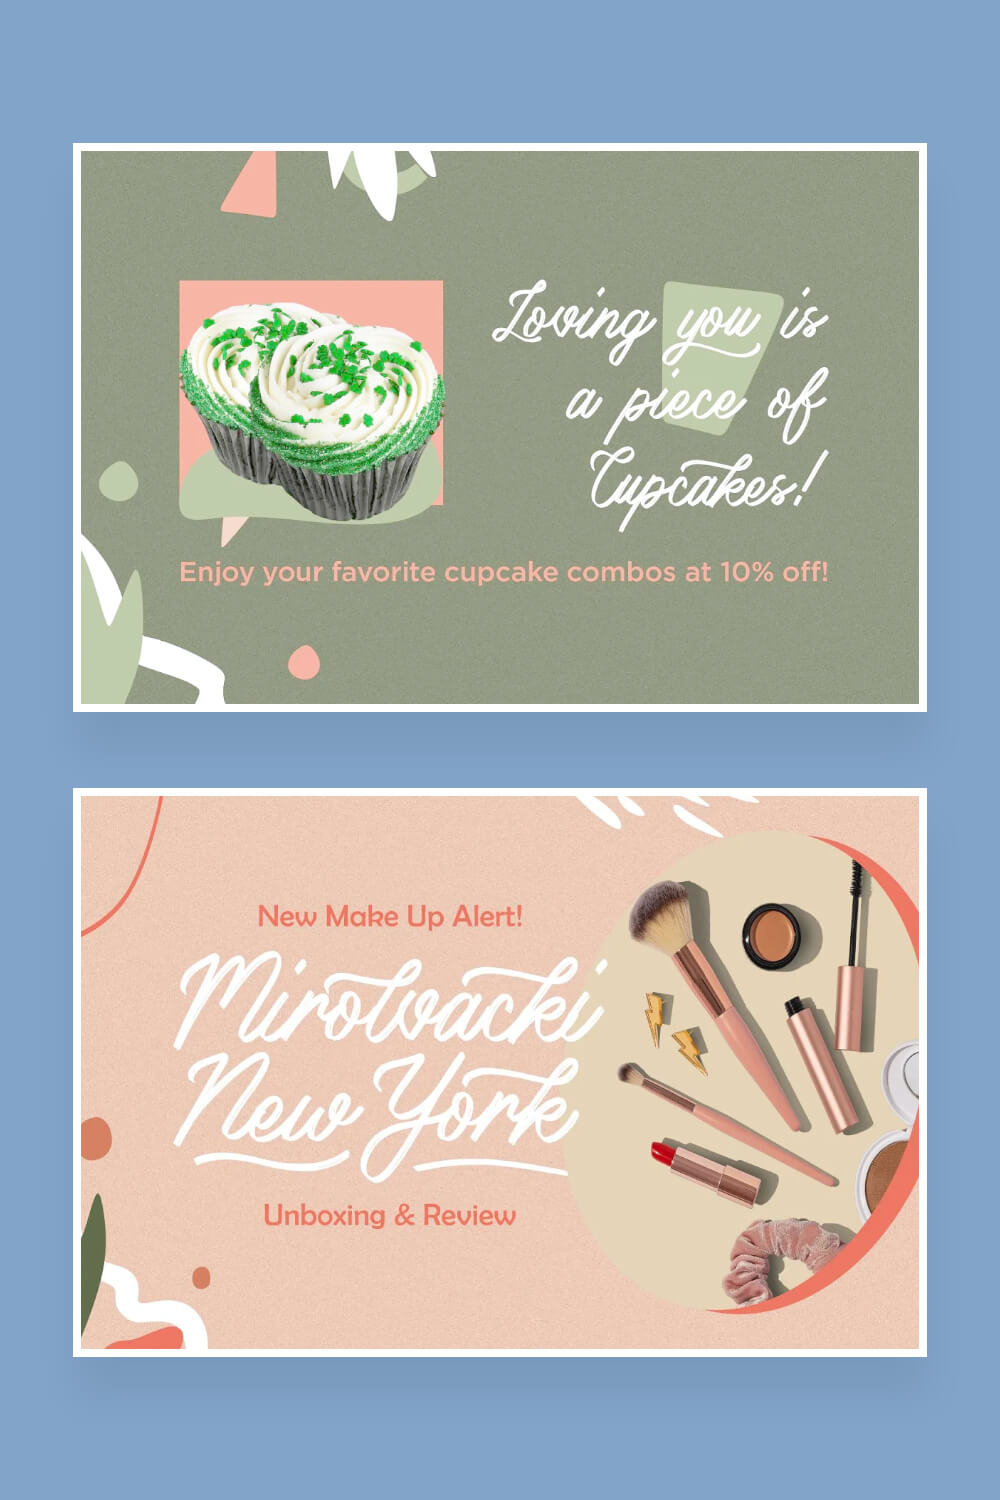 Two picture: Cupcakes and inscription (Loving you is a piece of Cupcakes).